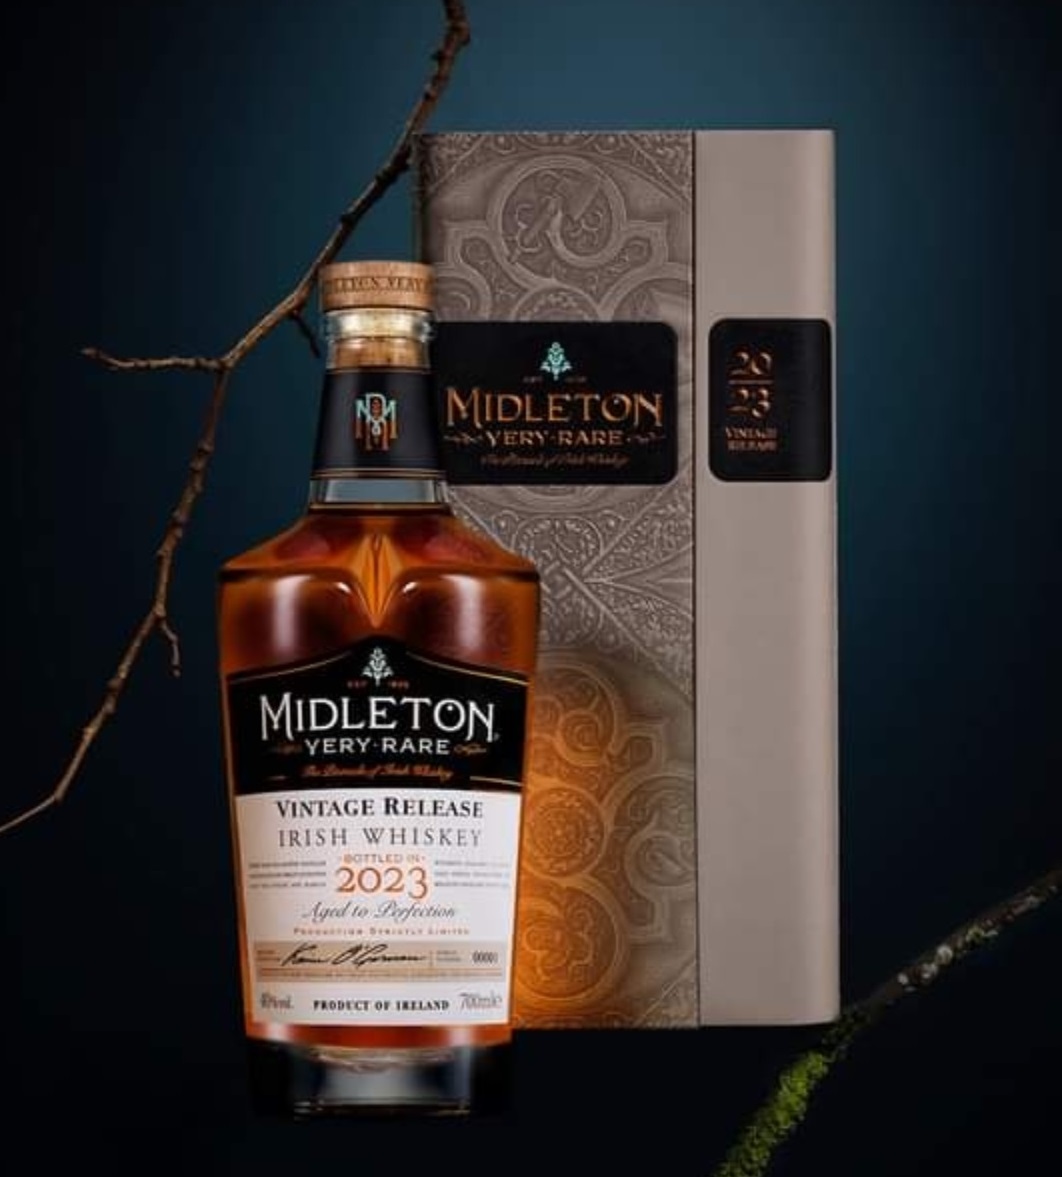 We currently have 2 bottles available via our web store...be quick! thewinecentre.ie/p/midleton-ver… #midletonveryrare #midletonveryrare2023